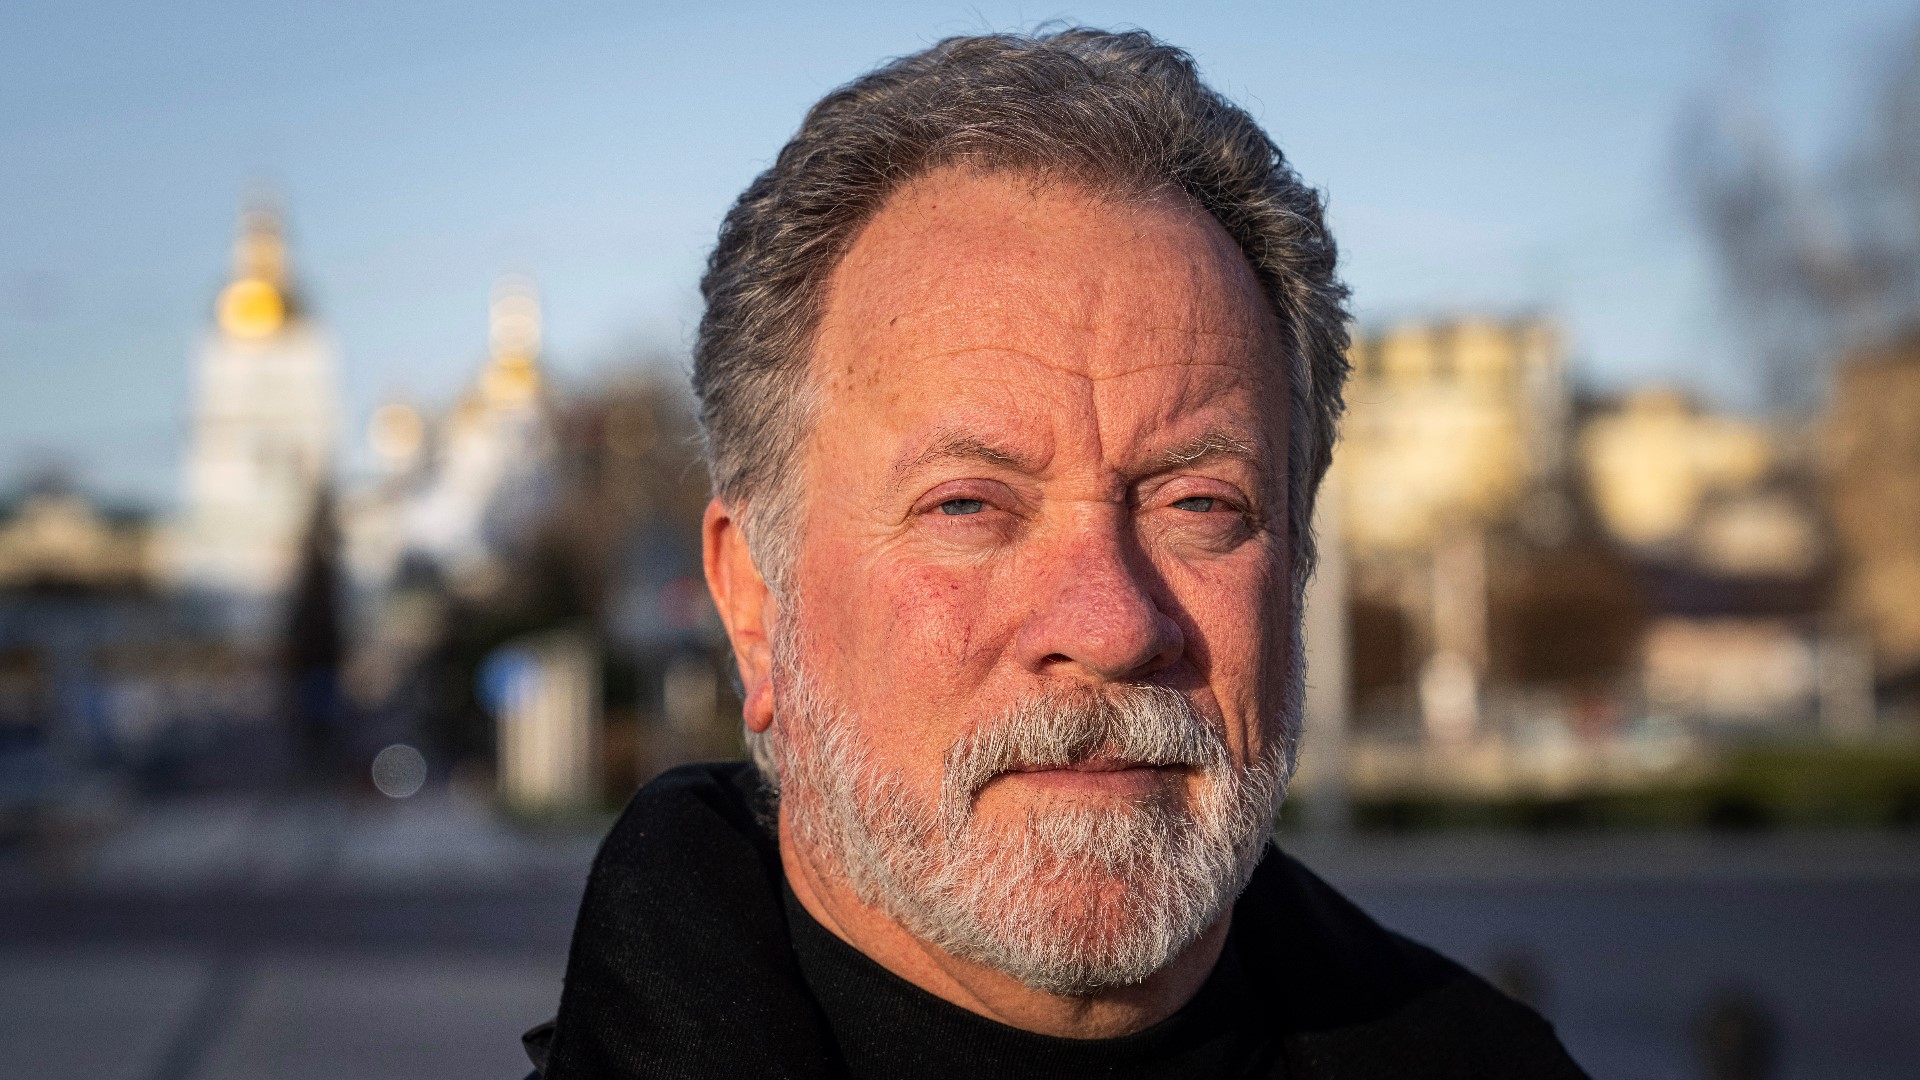 David Beasley, head of the U.N.’s World Food Program, says people are being “starved to death” in the besieged Ukrainian city of Mariupol.